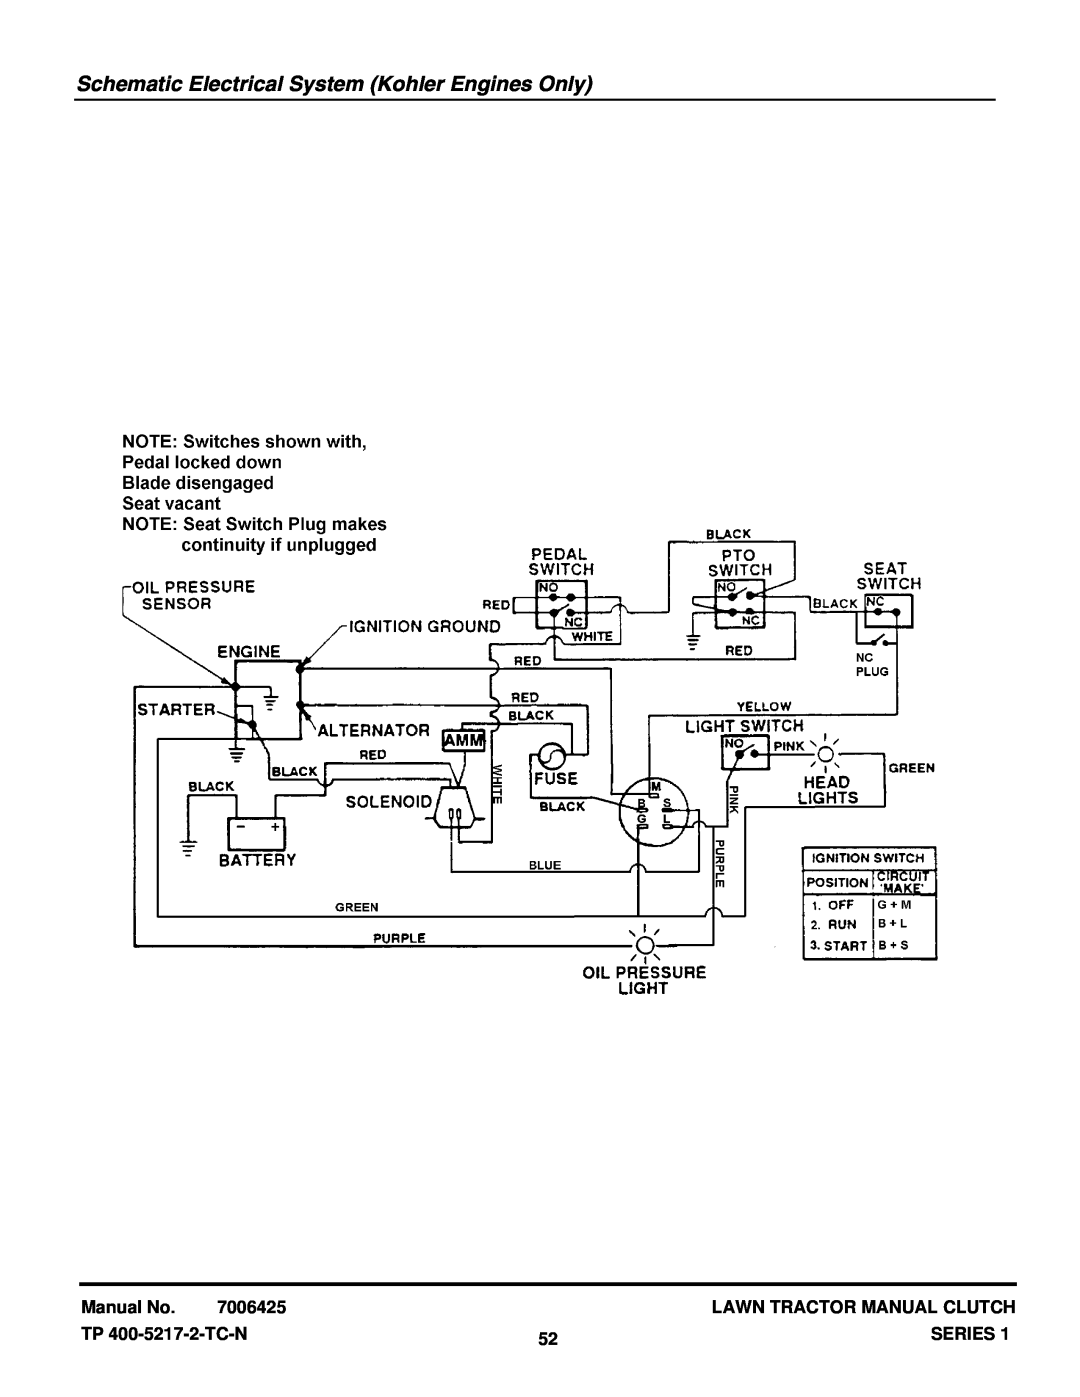 Snapper LT14H331KV Schematic Electrical System Kohler Engines Only, Manual No, 7006425, Lawn Tractor Manual Clutch, Series 